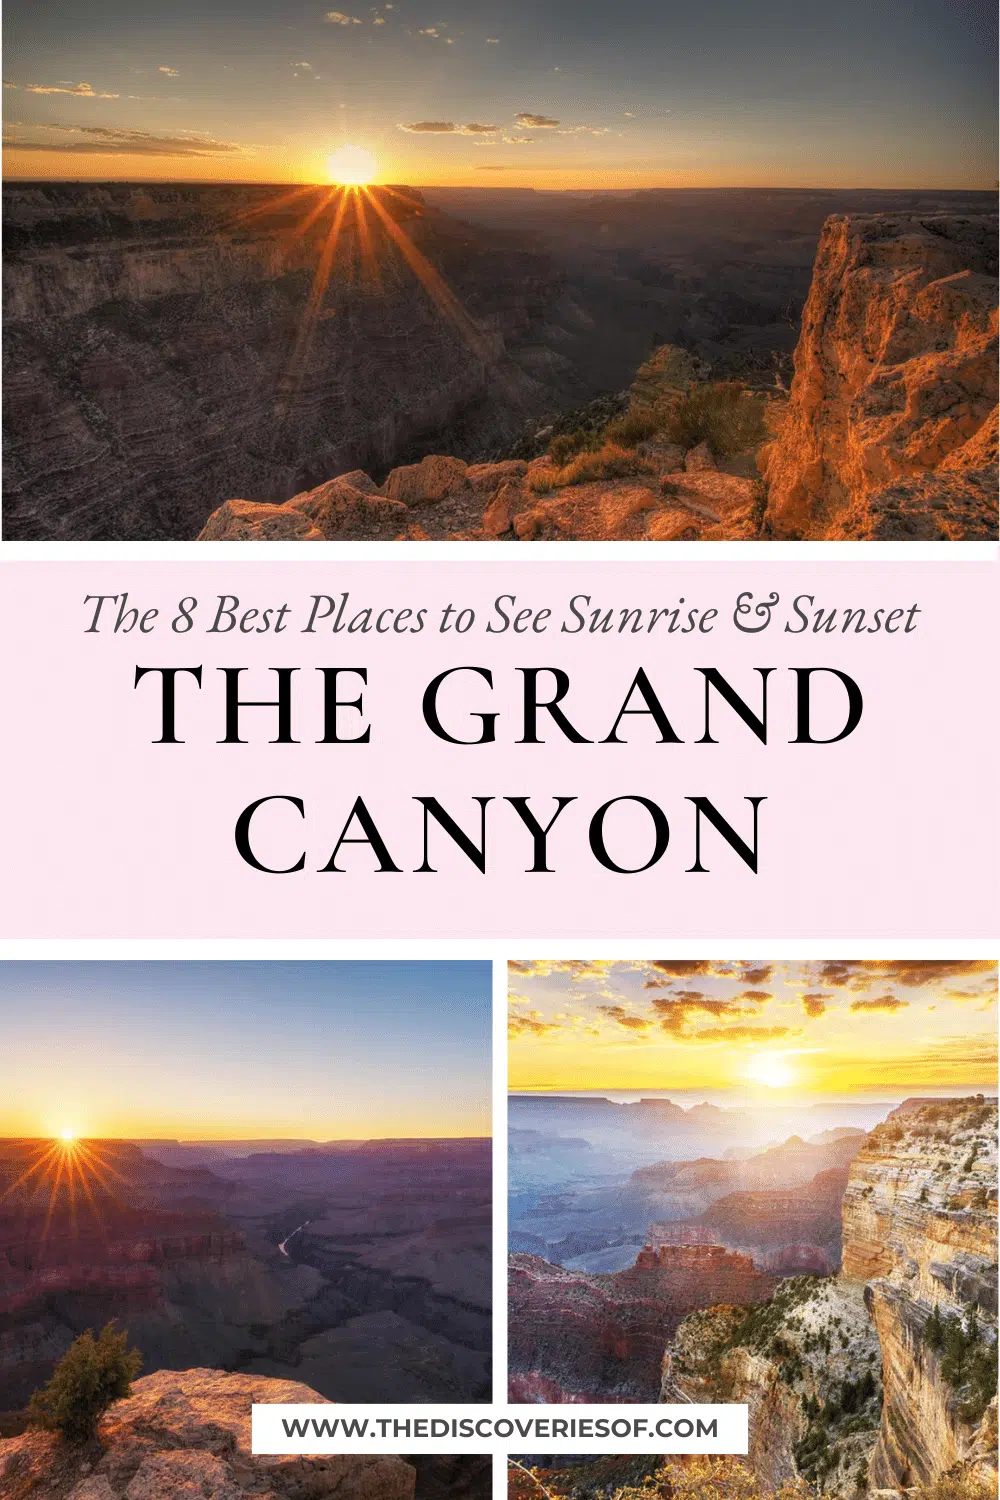 The 8 Best Places to See Sunrise & Sunset at the Grand Canyon